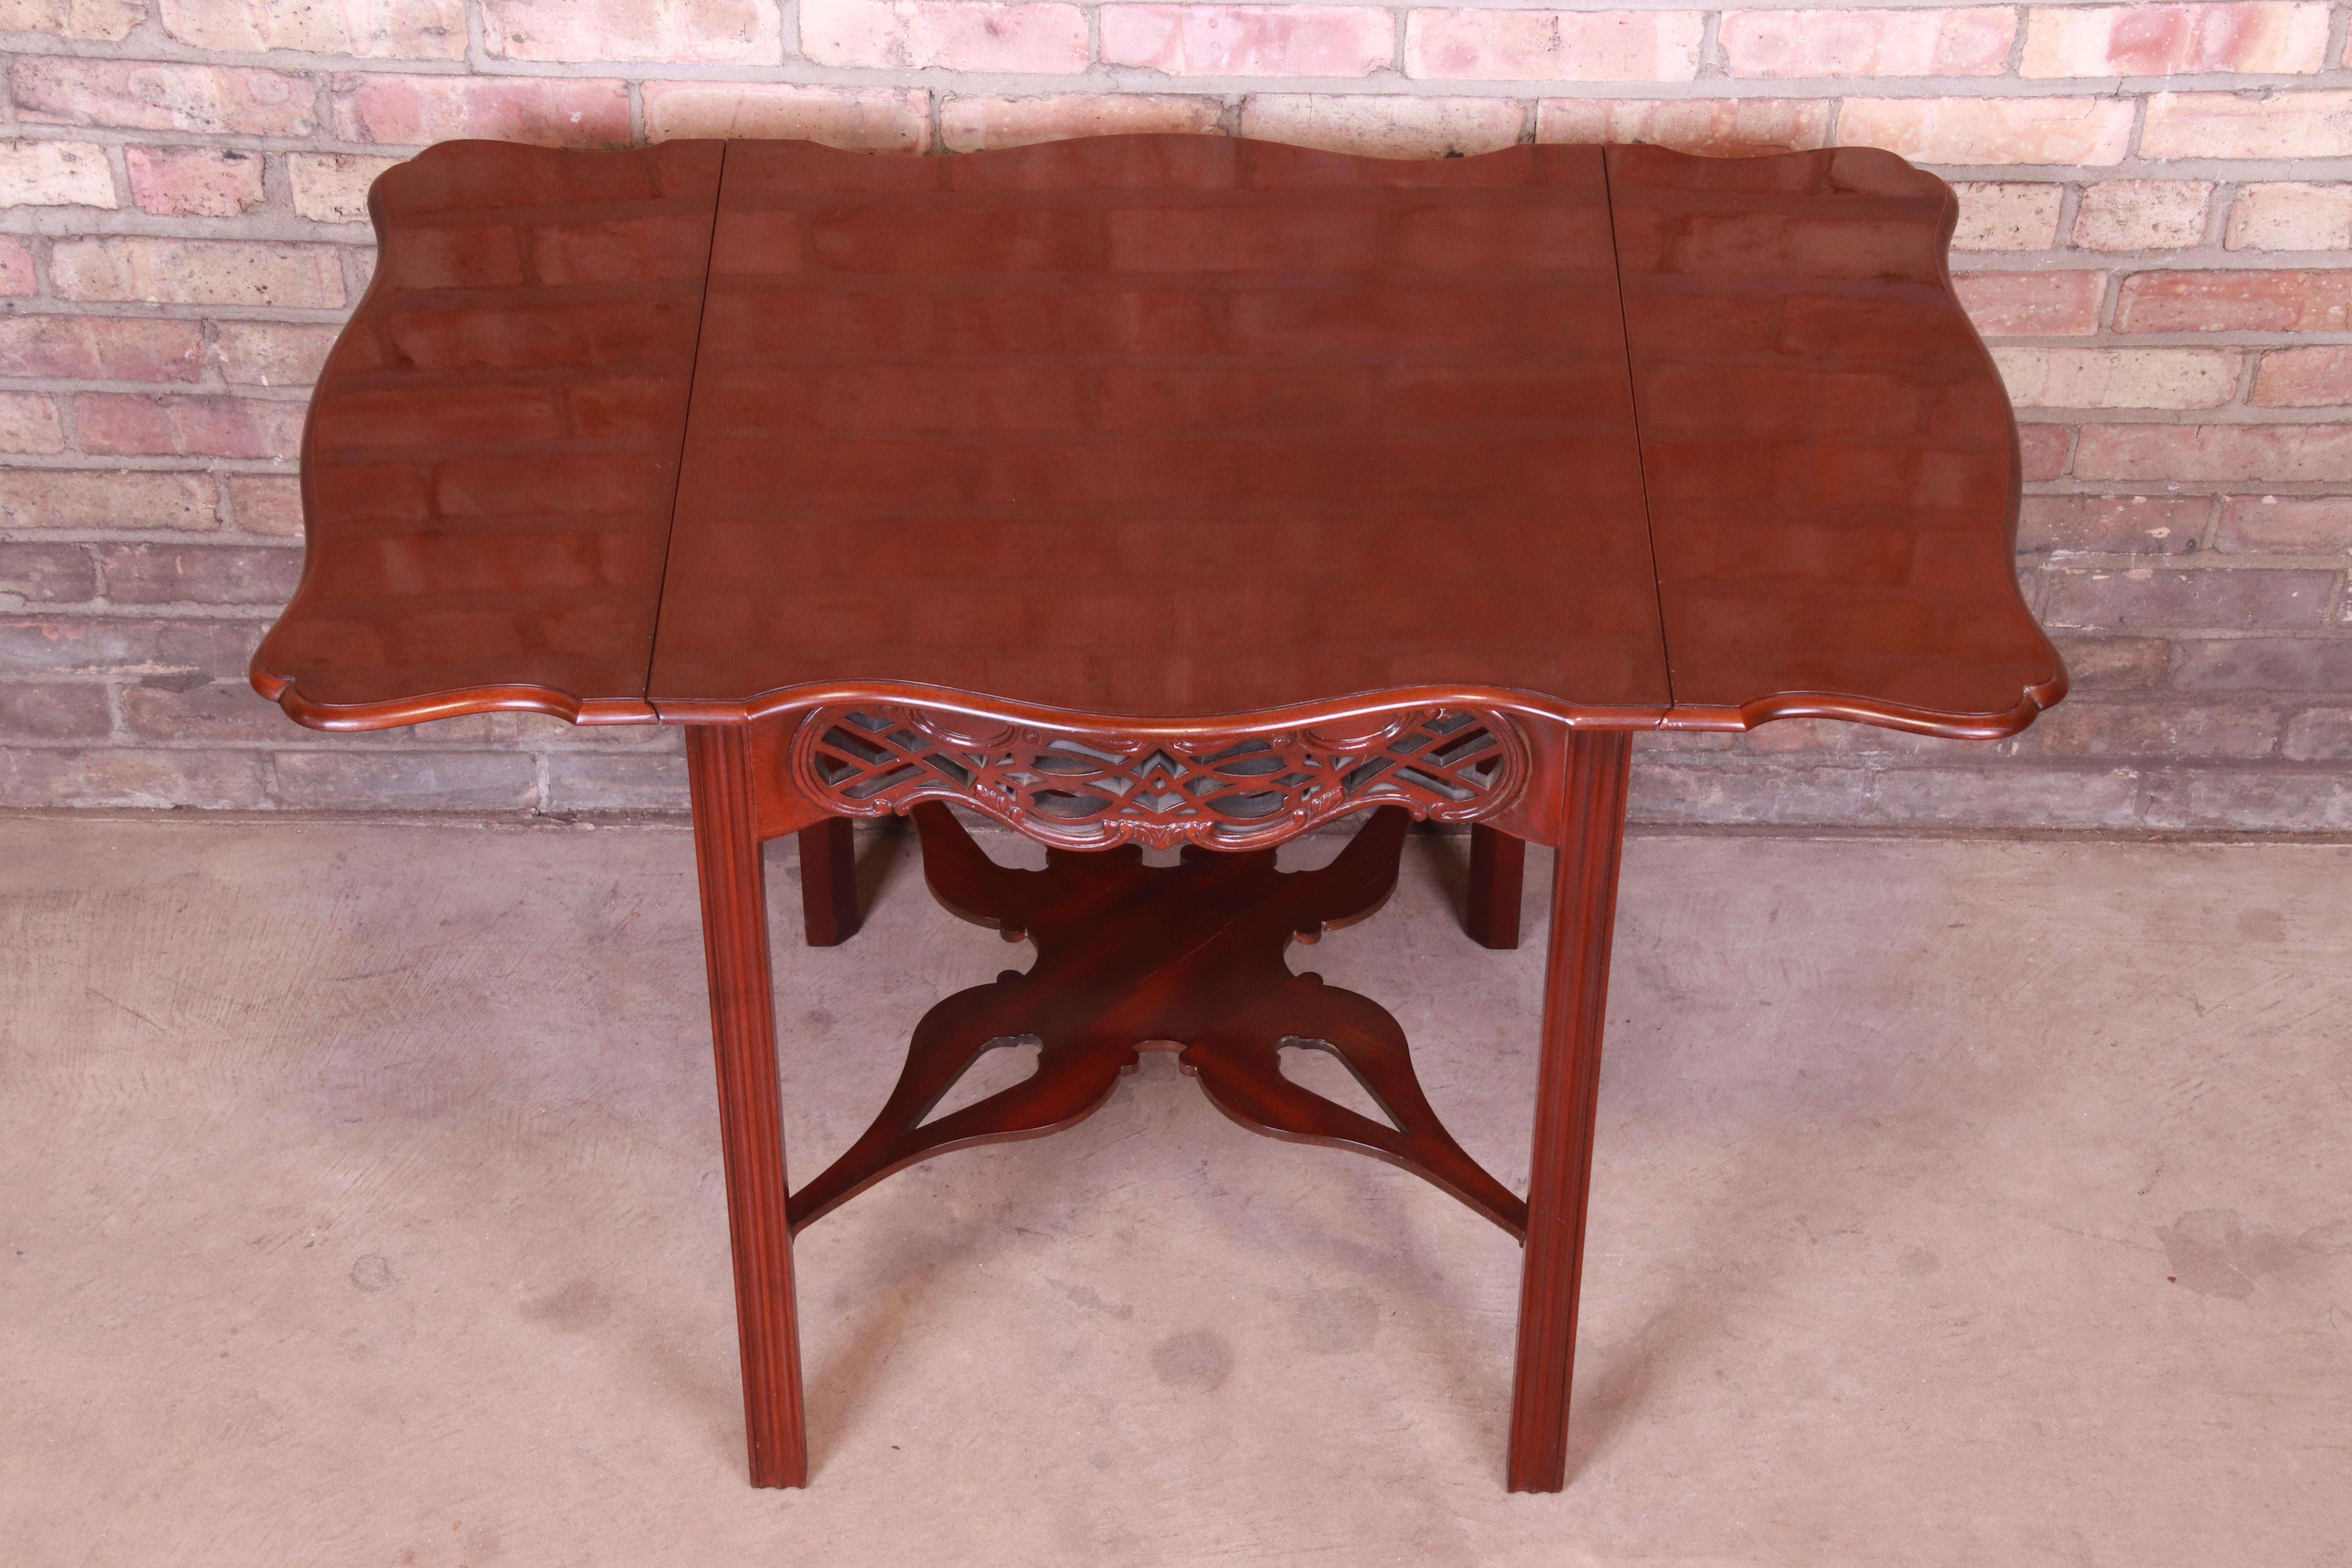 Baker Furniture Historic Charleston Collection Carved Mahogany Pembroke Table For Sale 3